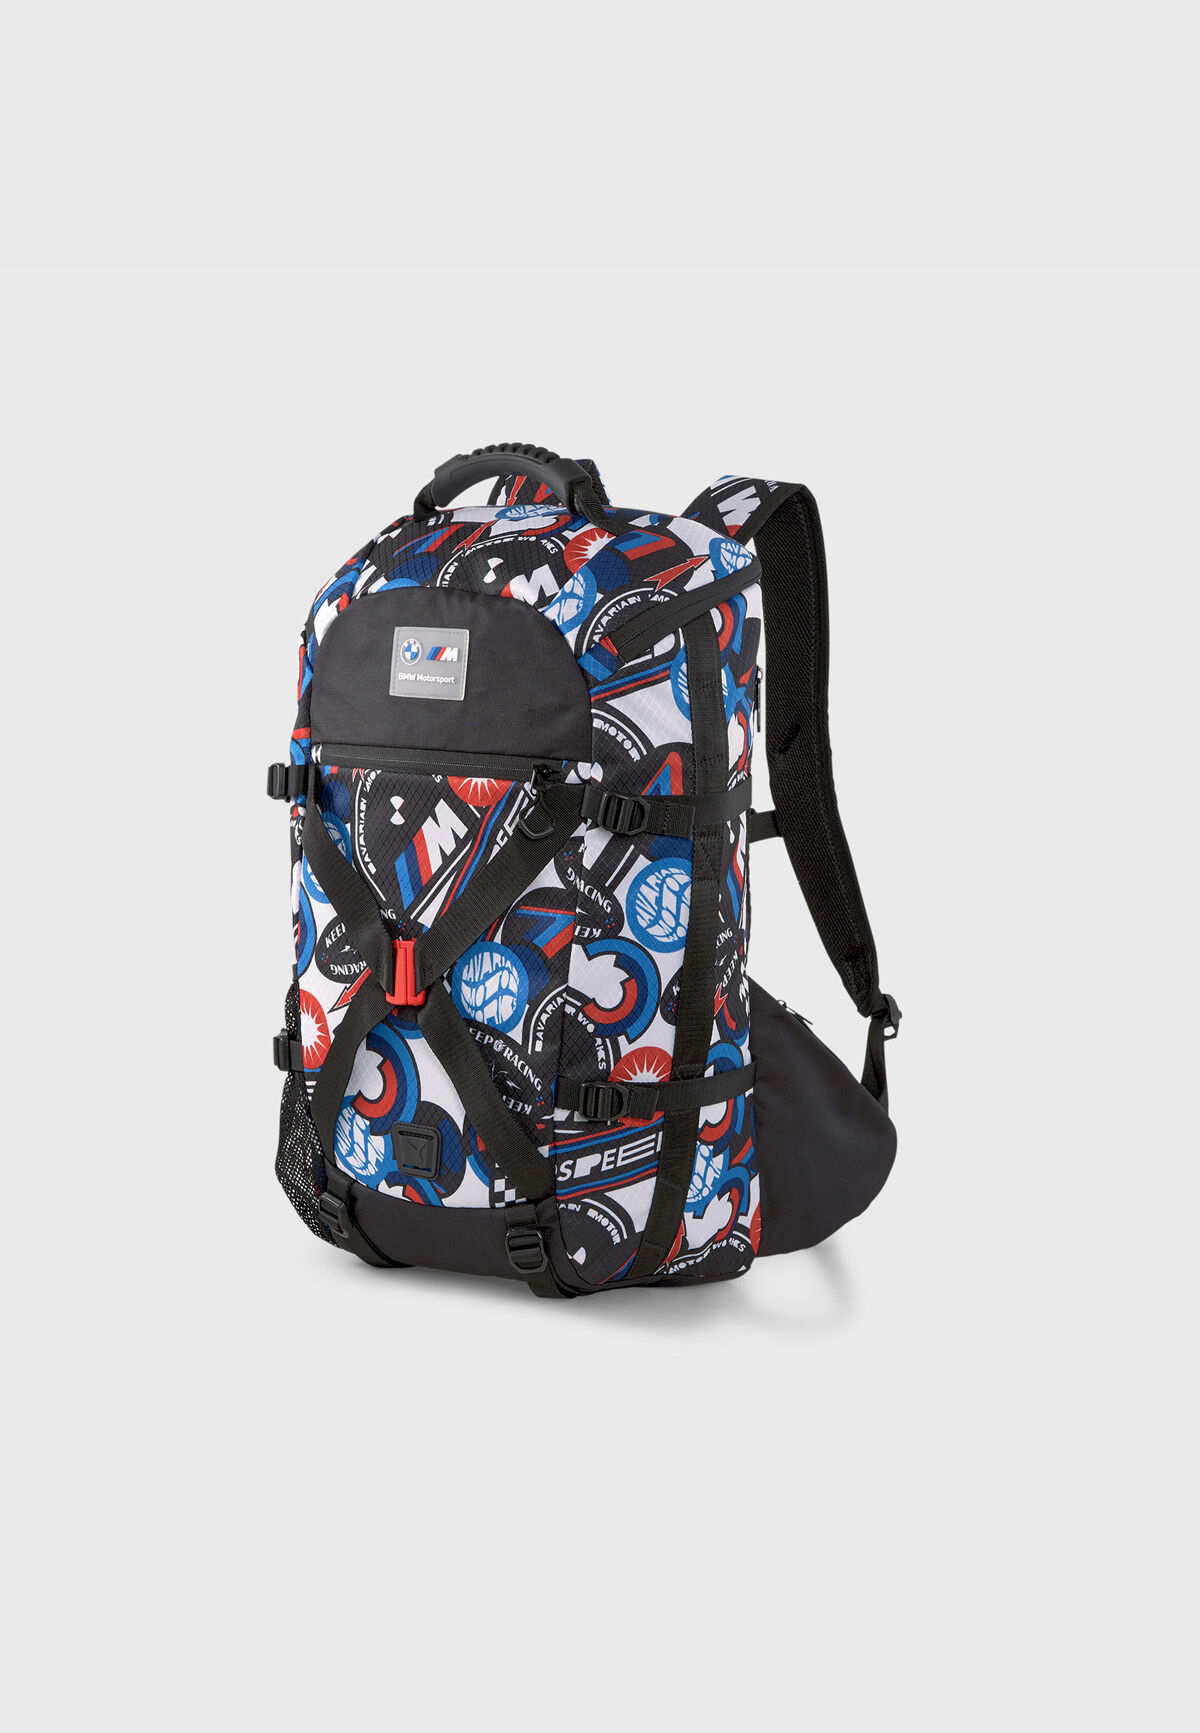 Sparco USA - Motorsports Racing Apparel and Accessories. MARTINI SPORTBAG